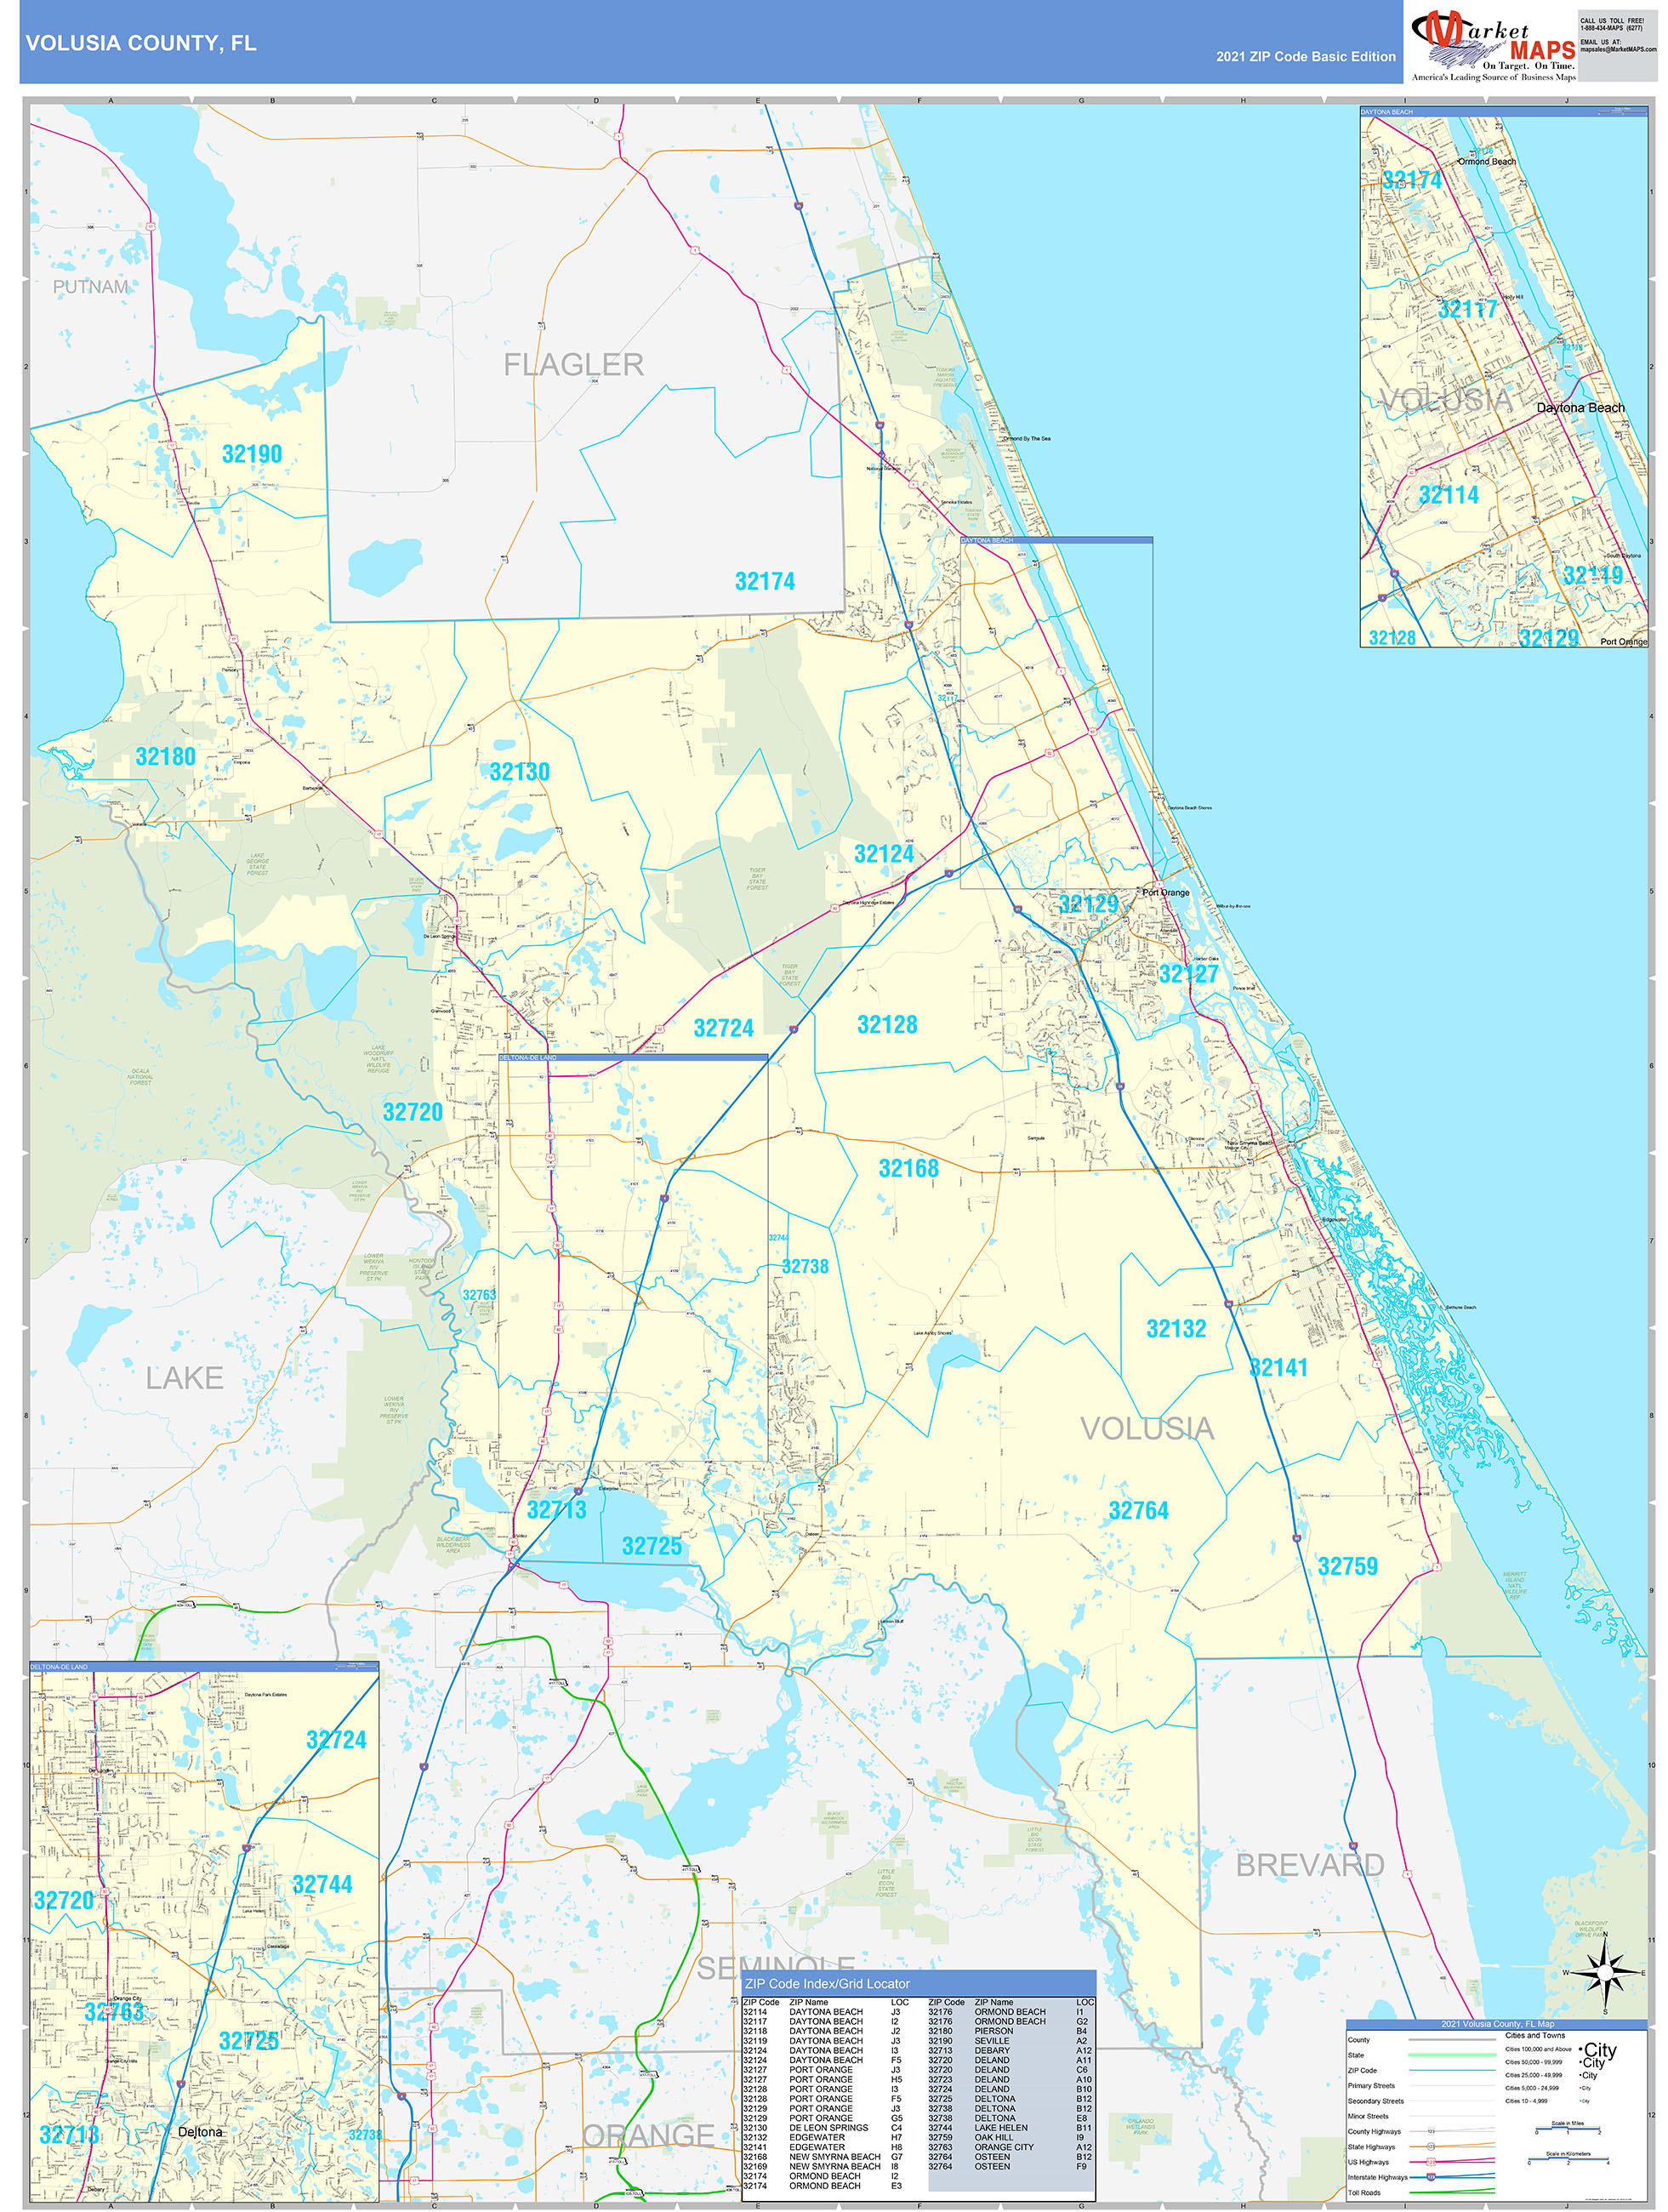 Volusia County, FL Zip Code Wall Map Basic Style by MarketMAPS MapSales